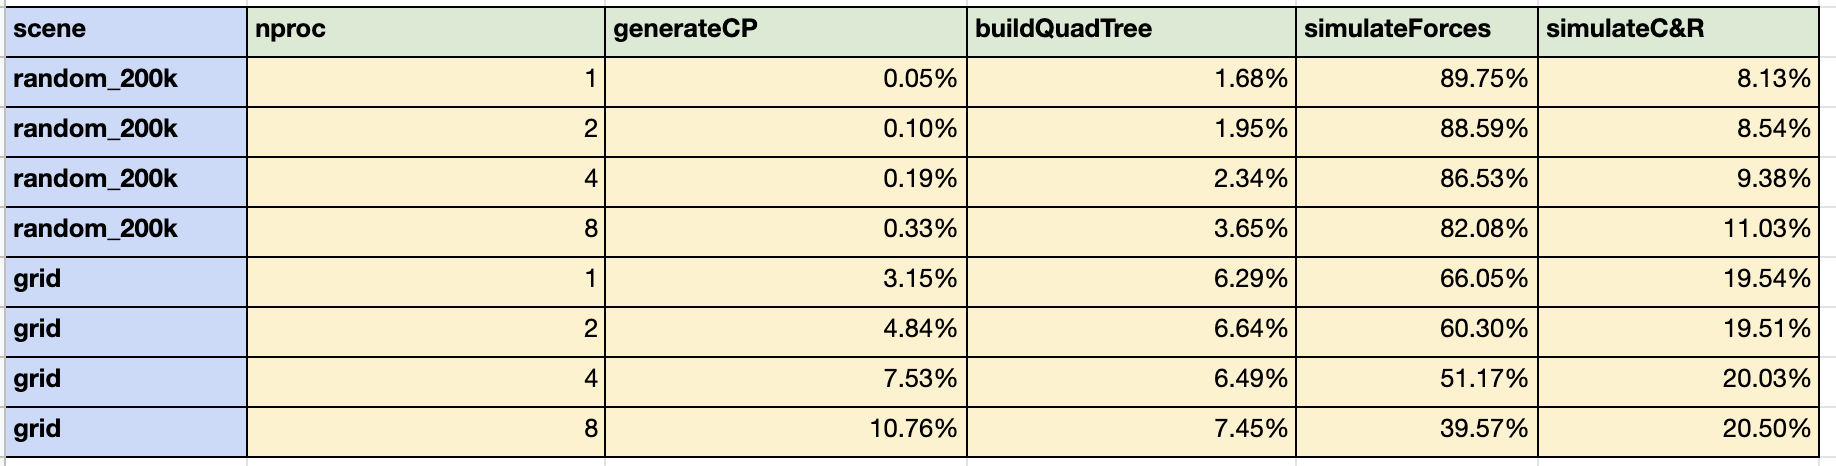 Table 2: Percentage of Total Execution Time for each Sub-routine